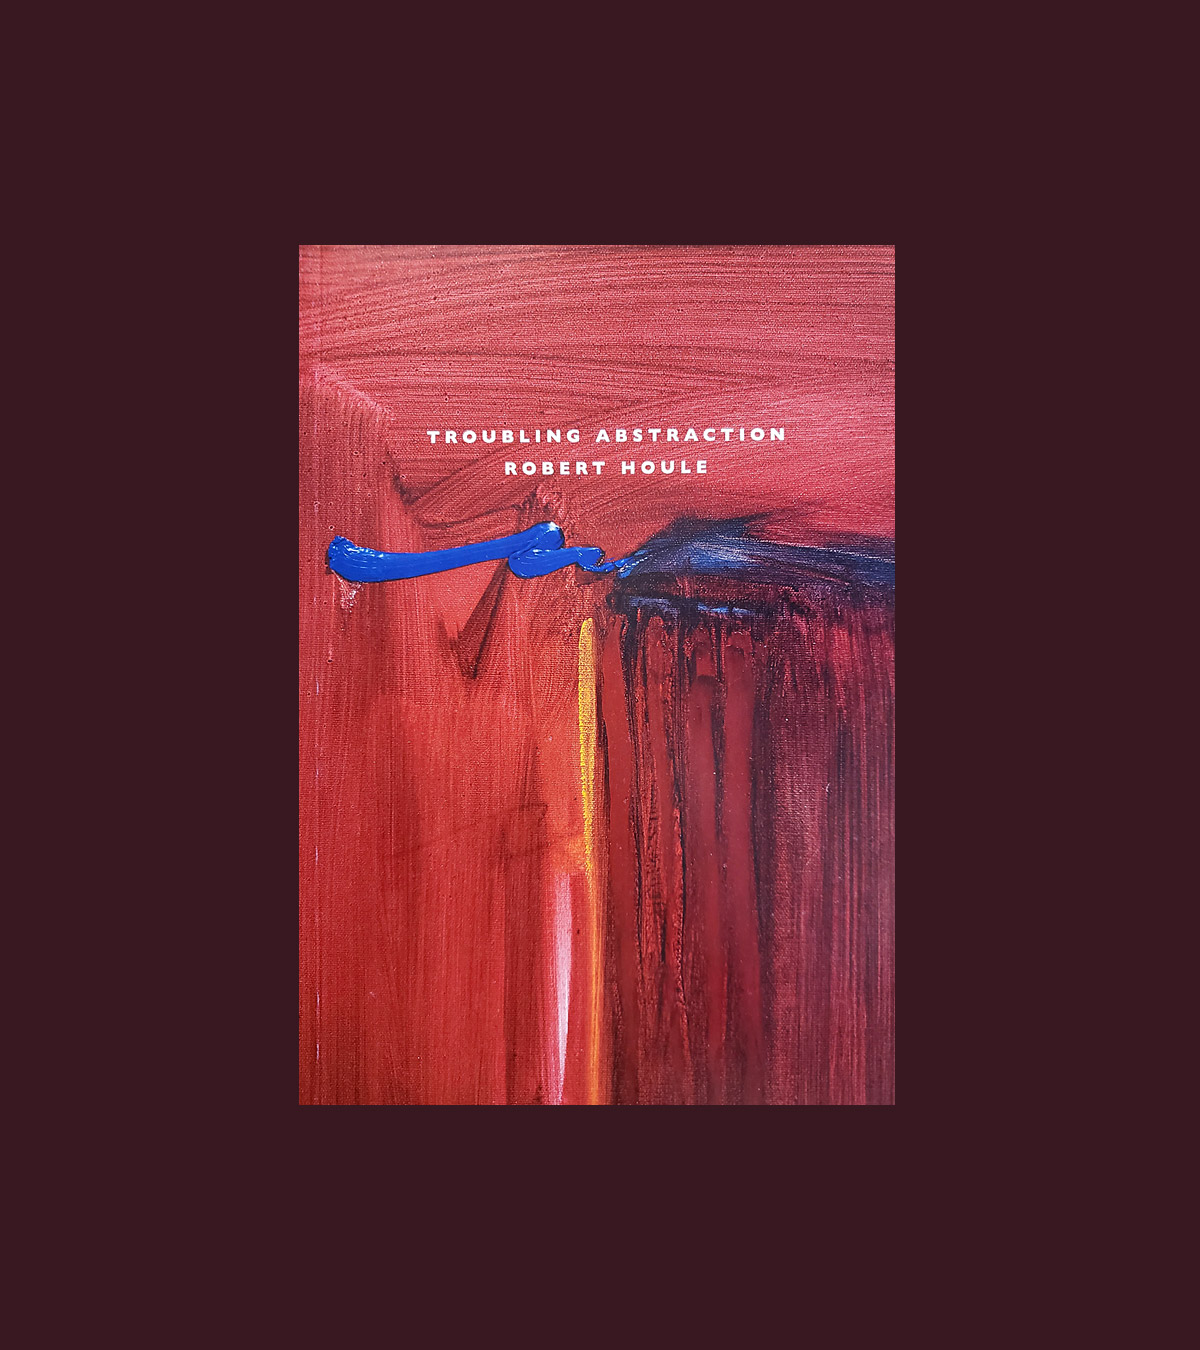 Book cover with image of abstract red and blue painting